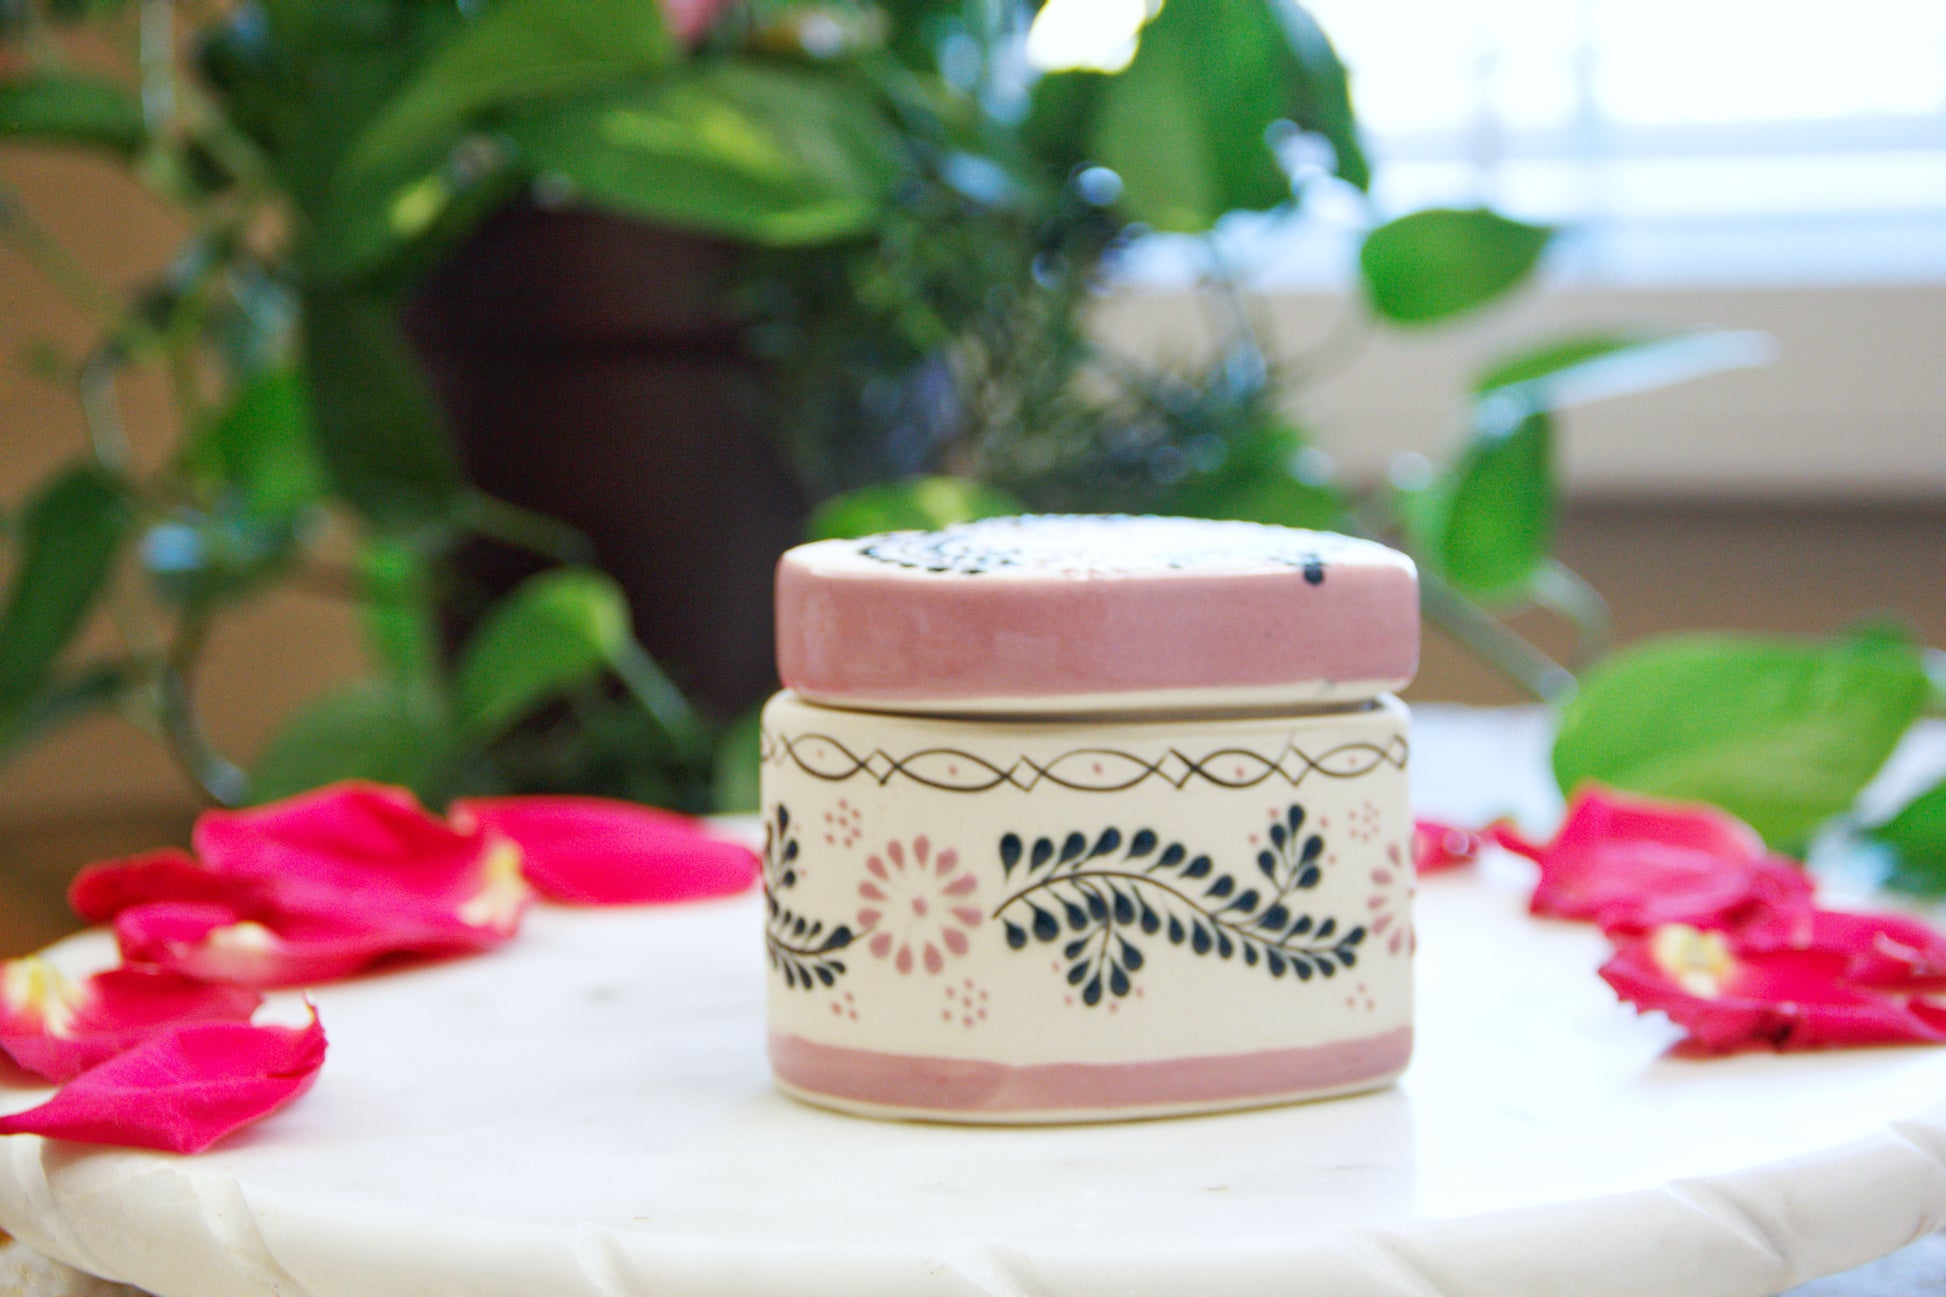 side view of an Artisanal candle in a beautiful heart shaped talavera. Handmade pink floral design with a closed lid. Handcrafted by Artisan in Mexico City. 100% All Natural Soy Candle. Reuse the talavera as home decor or storage.